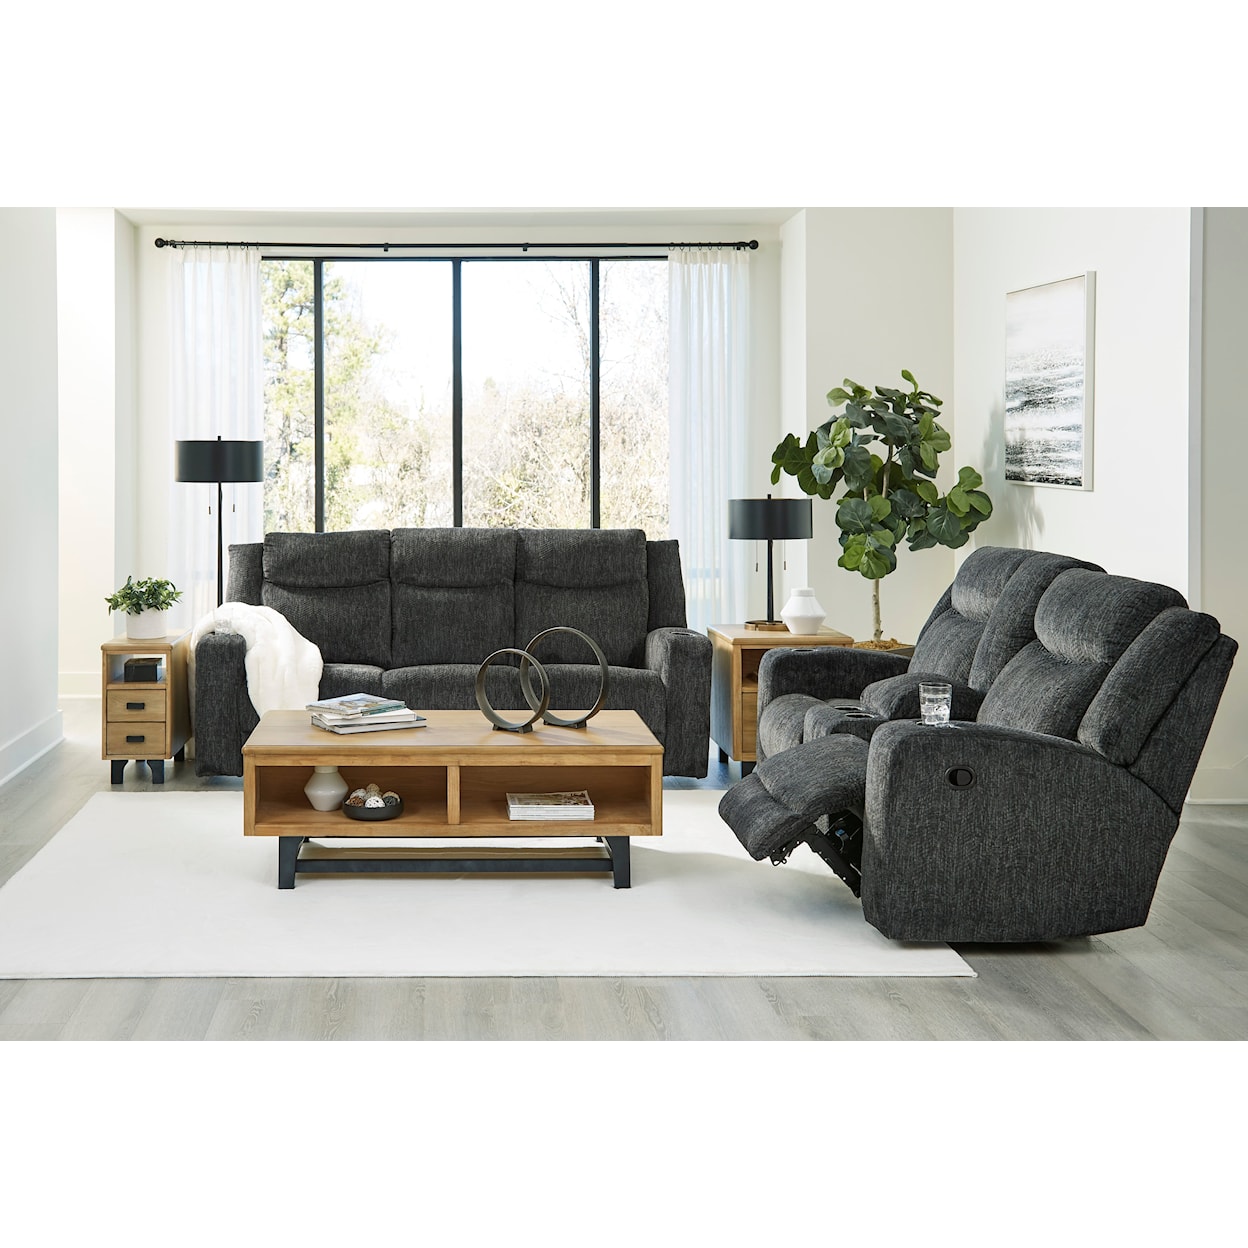 Signature Design by Ashley Furniture Martinglenn Reclining Loveseat with Console